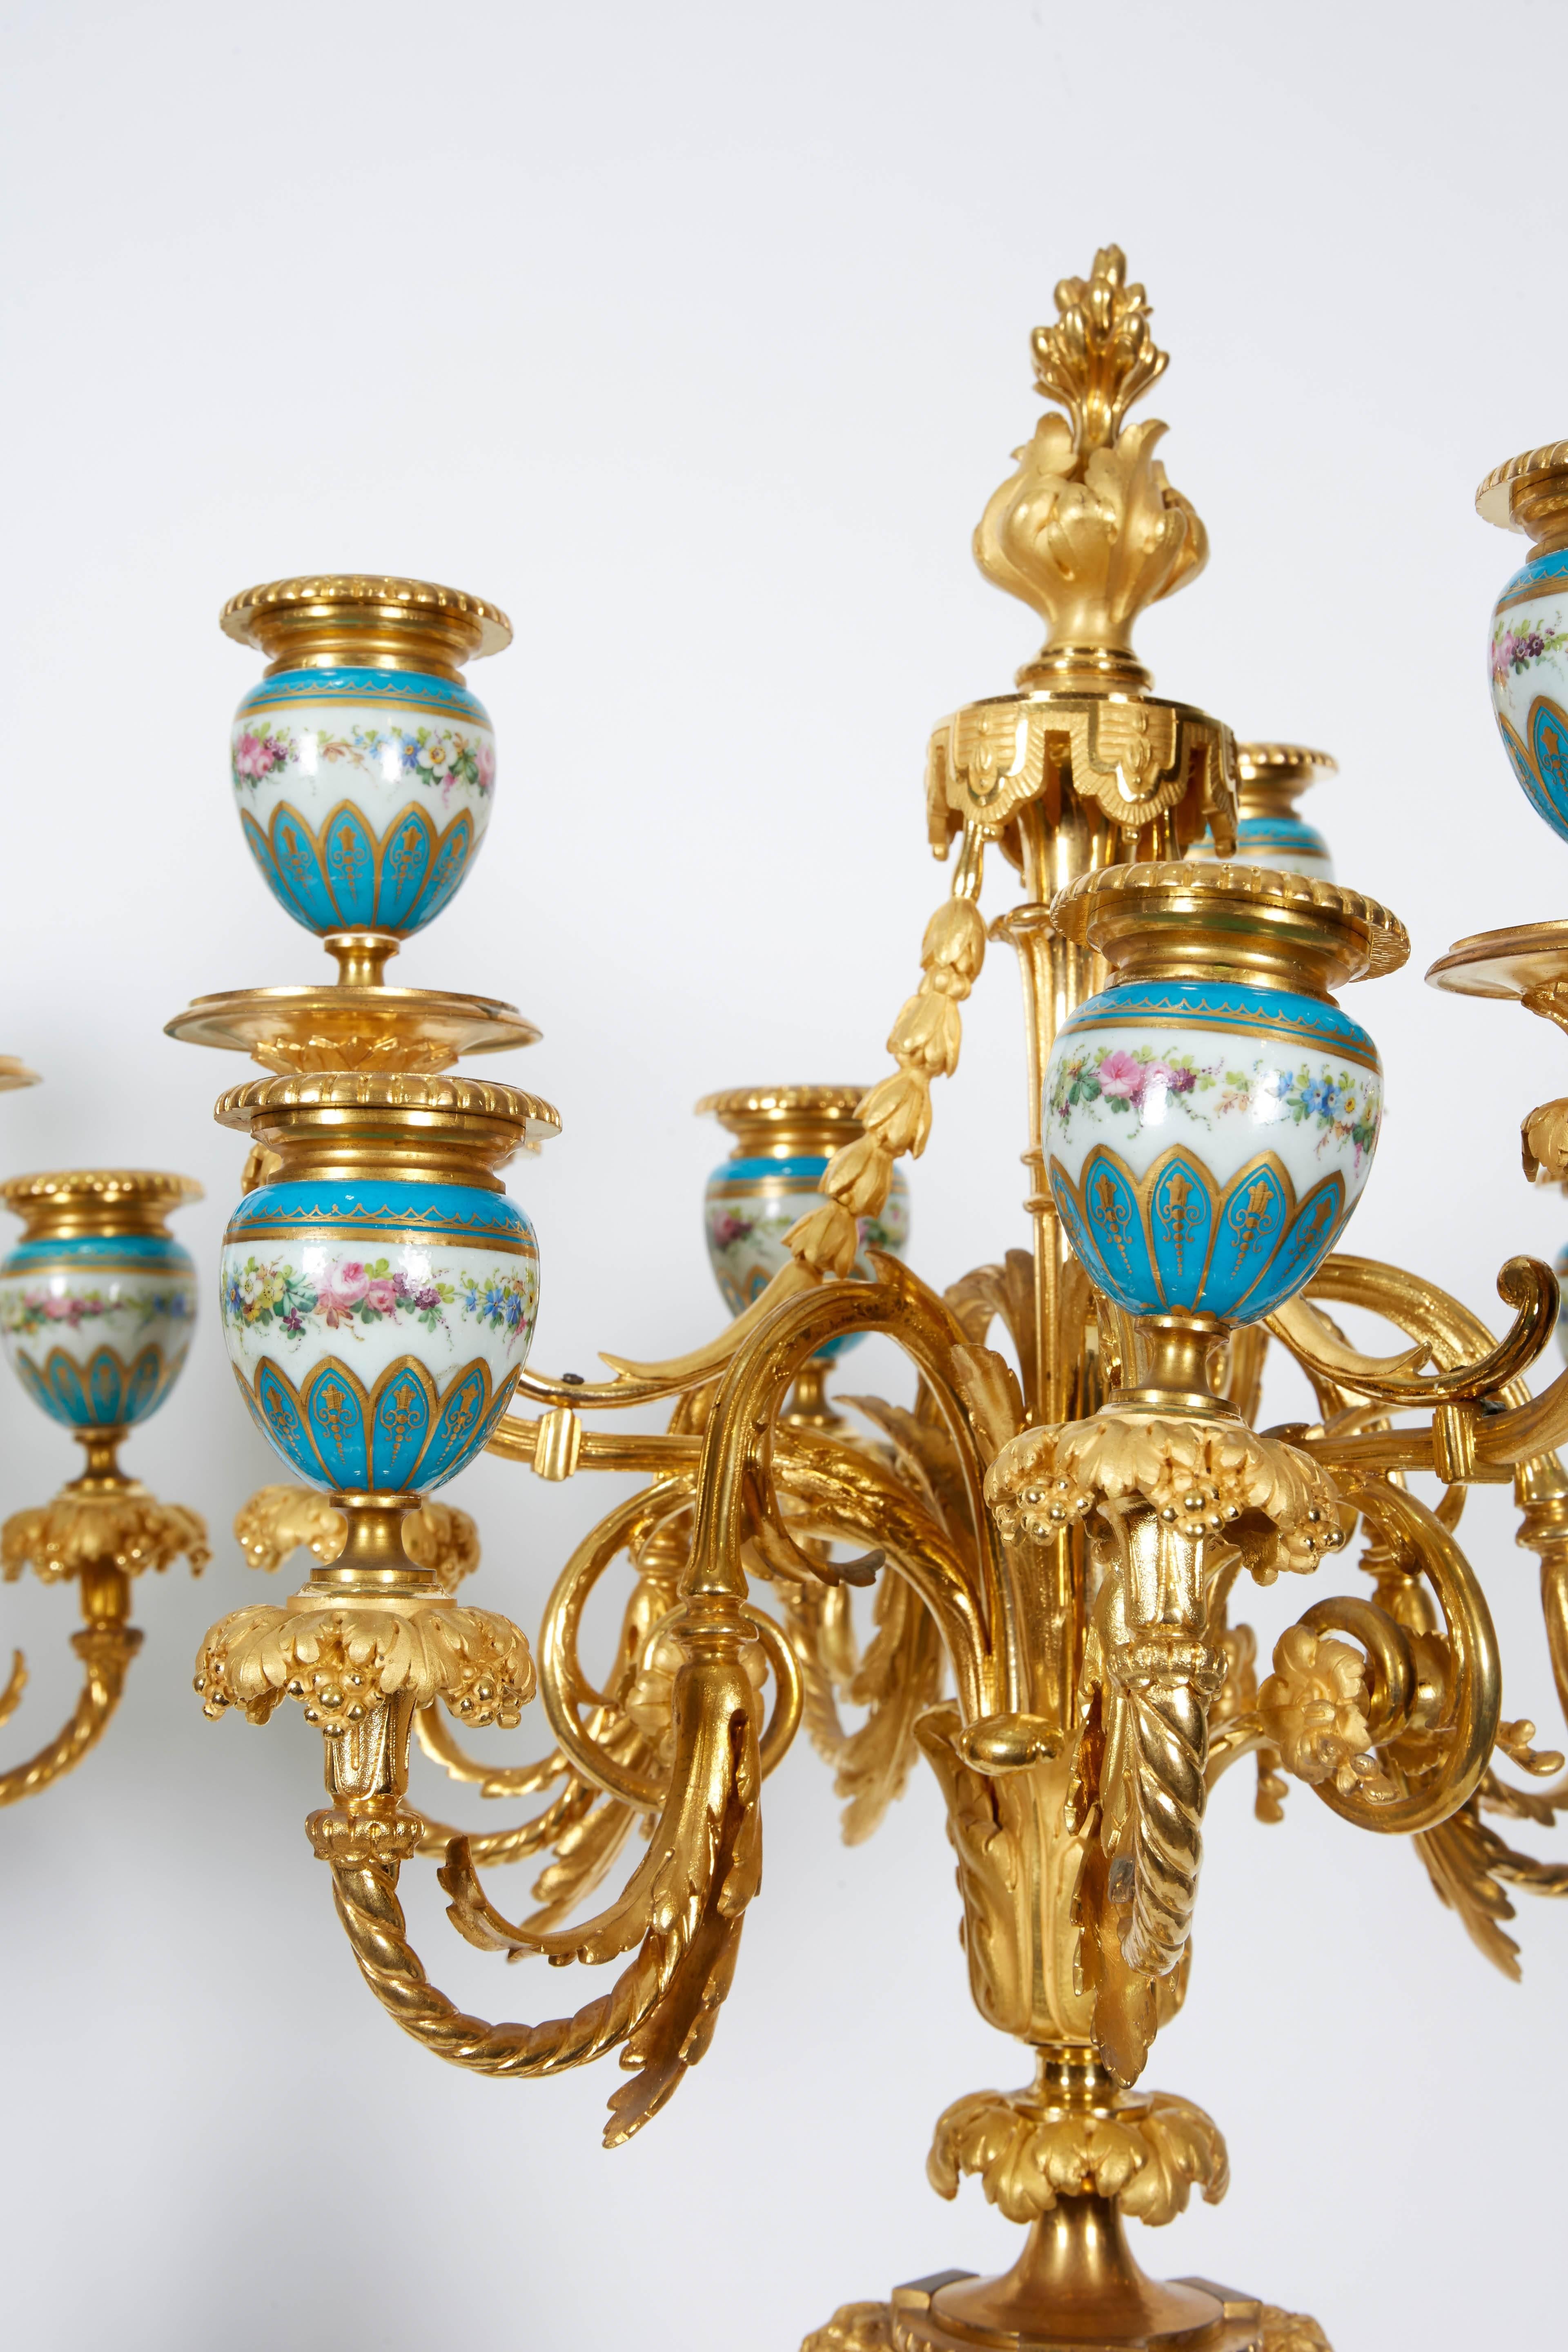 19th Century Exquisite Pair of French Ormolu and Turquoise Sevres Porcelain Candelabra